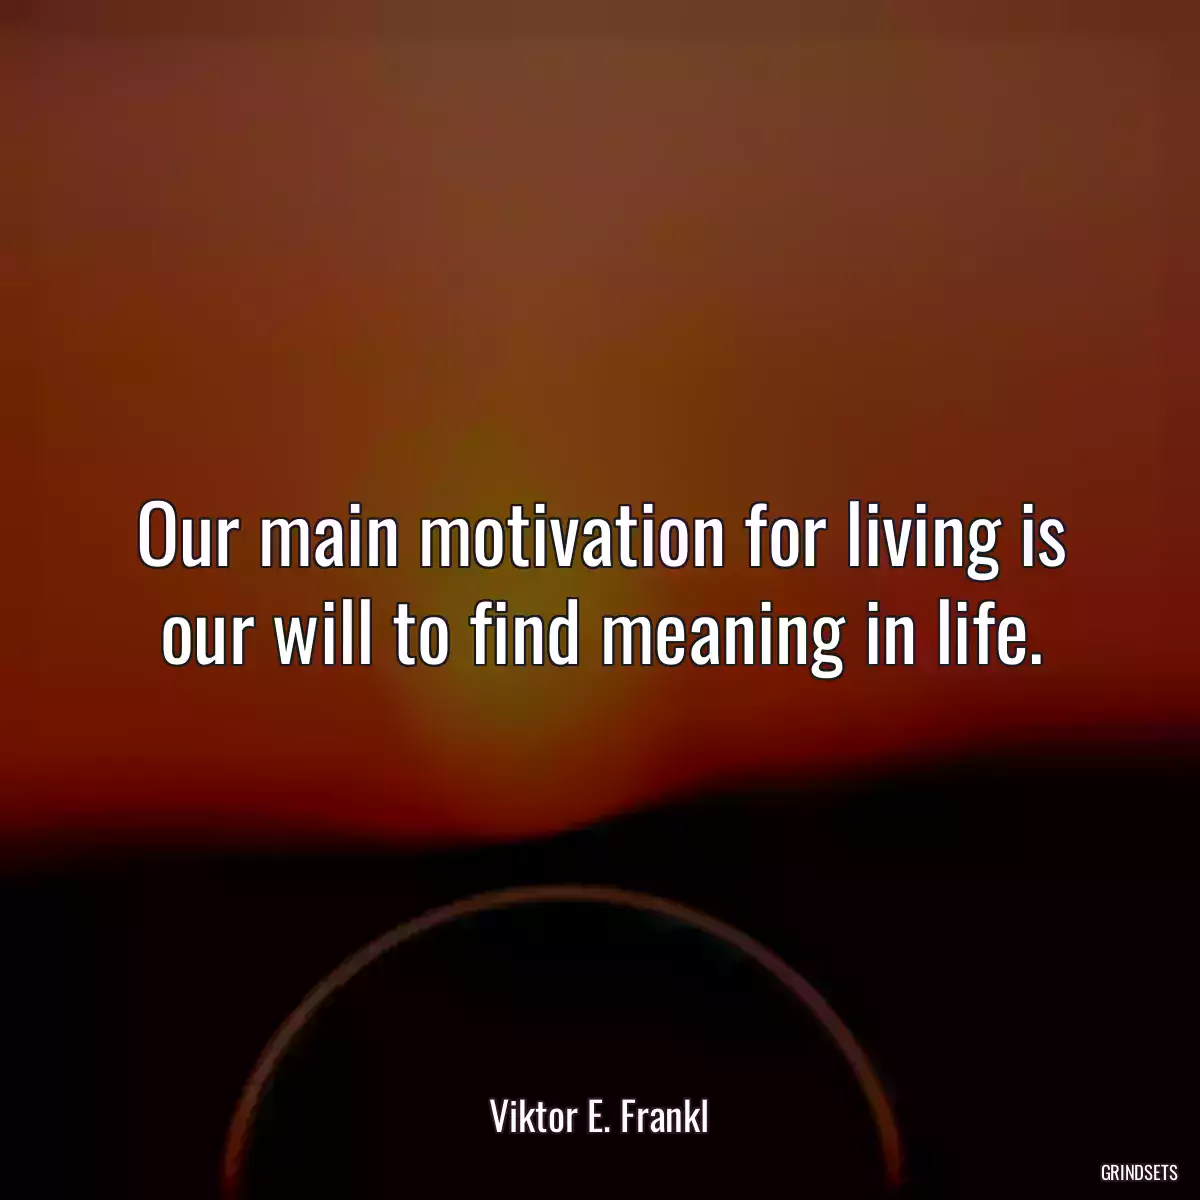 Our main motivation for living is our will to find meaning in life.